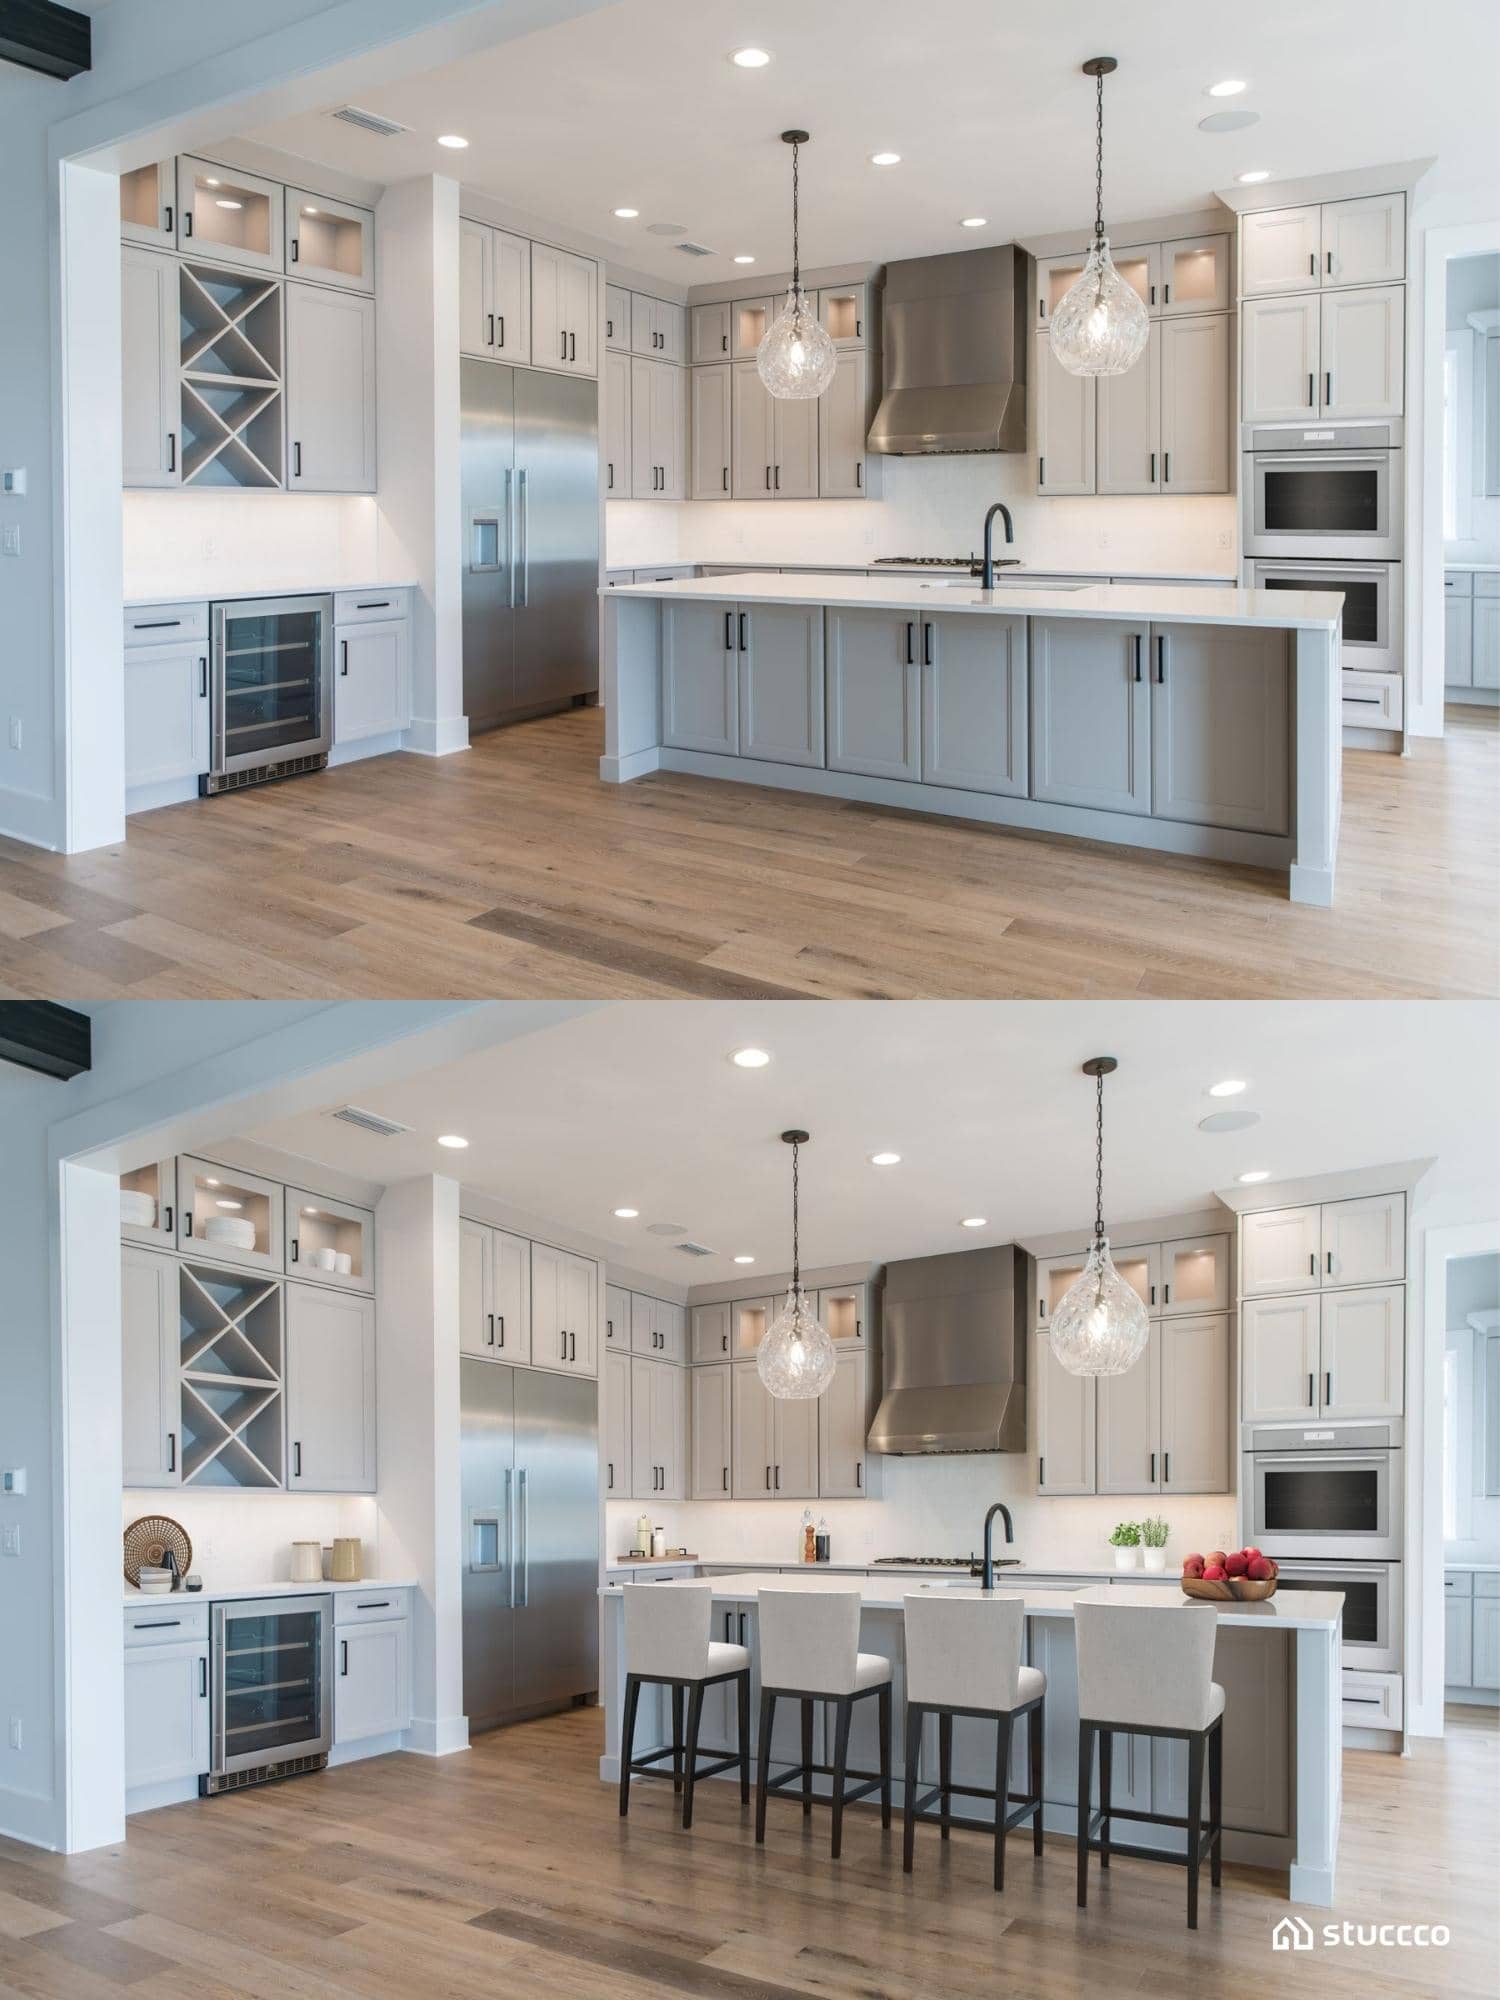 Kitchen images before and after staging